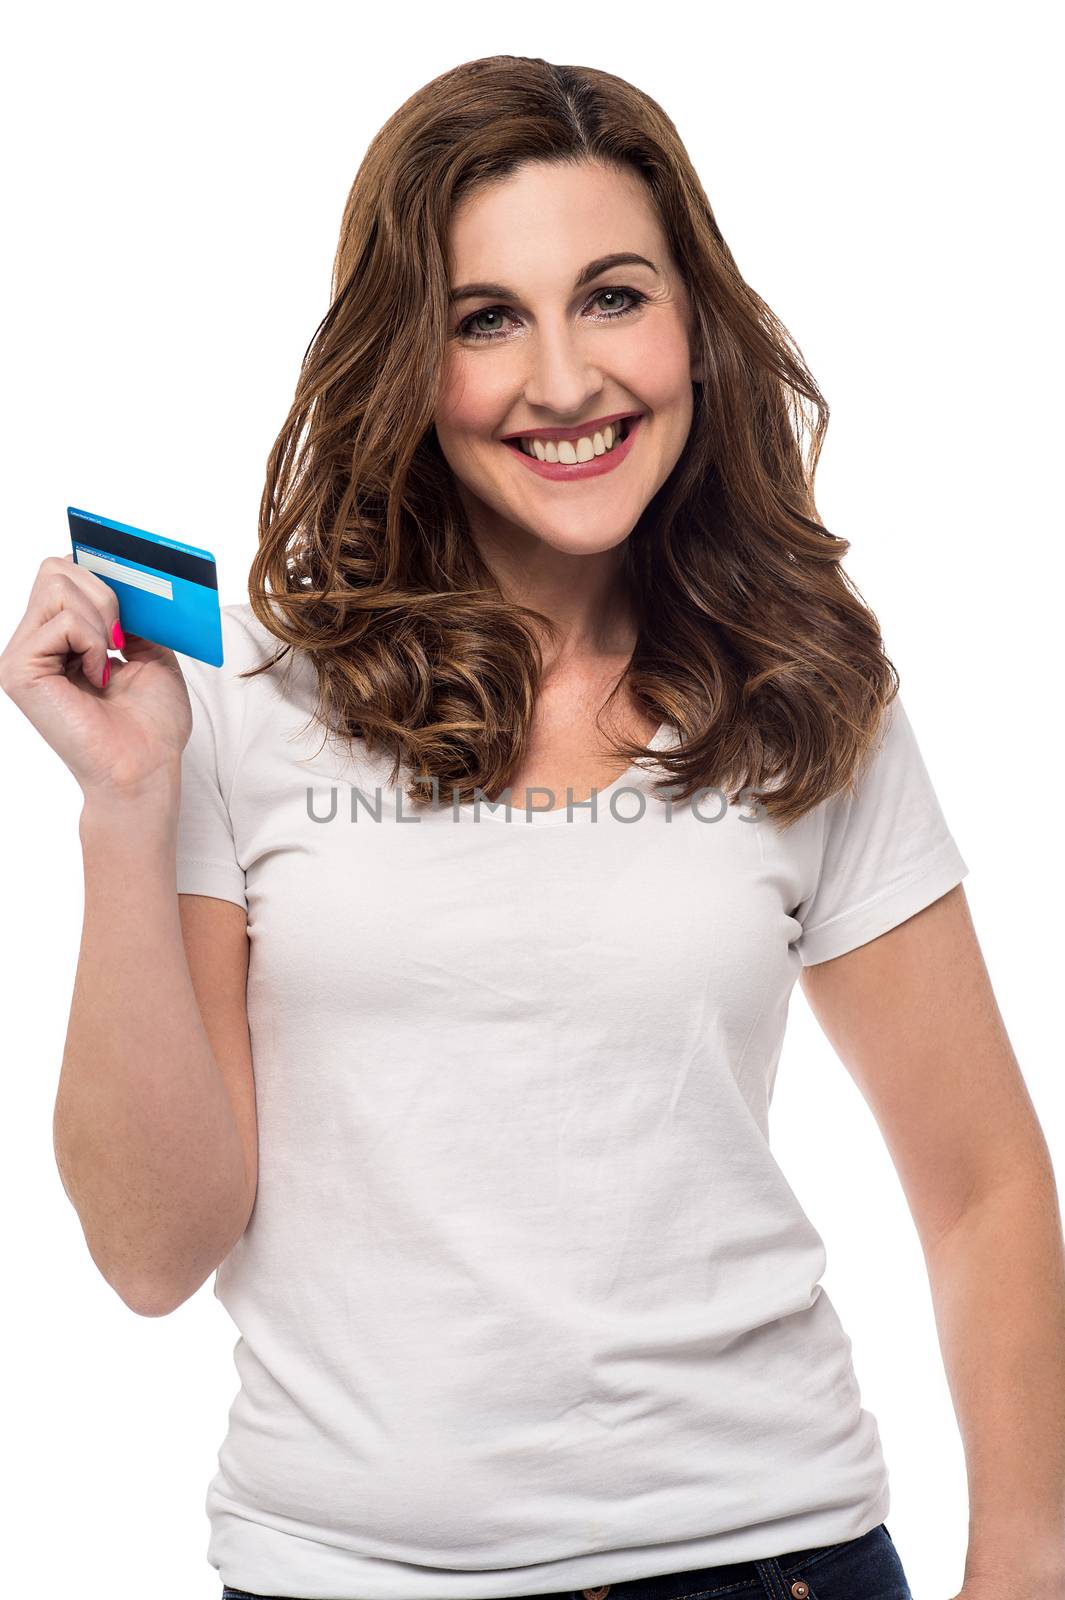 Credit card made shopping easy ! by stockyimages